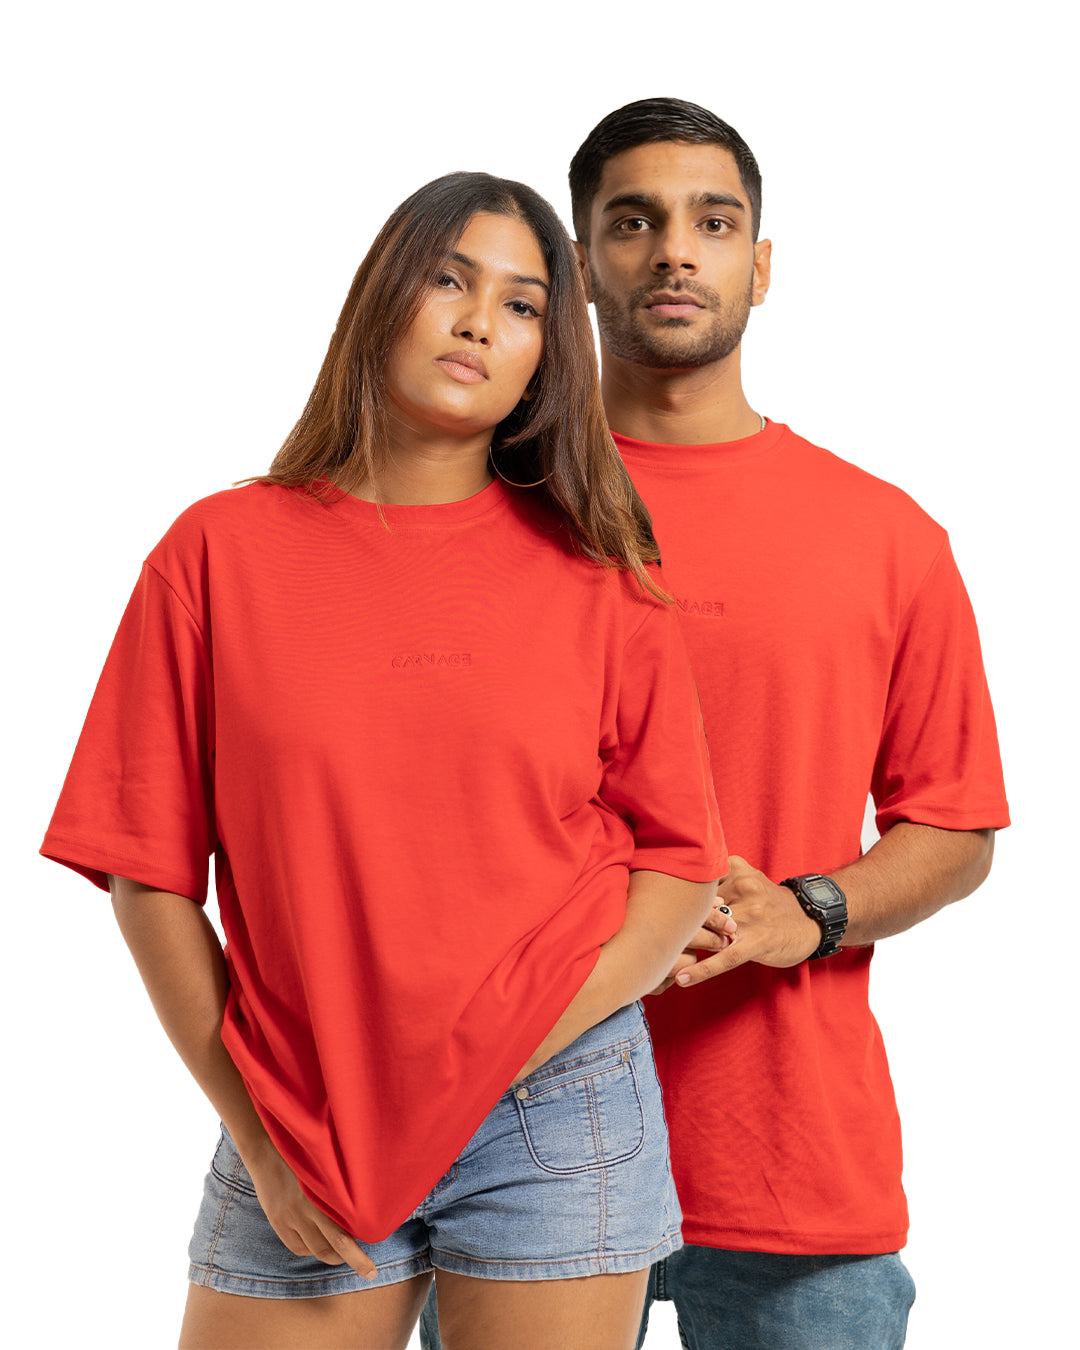 Carnage Desire Oversize Tee - Pacific Red - Unisex